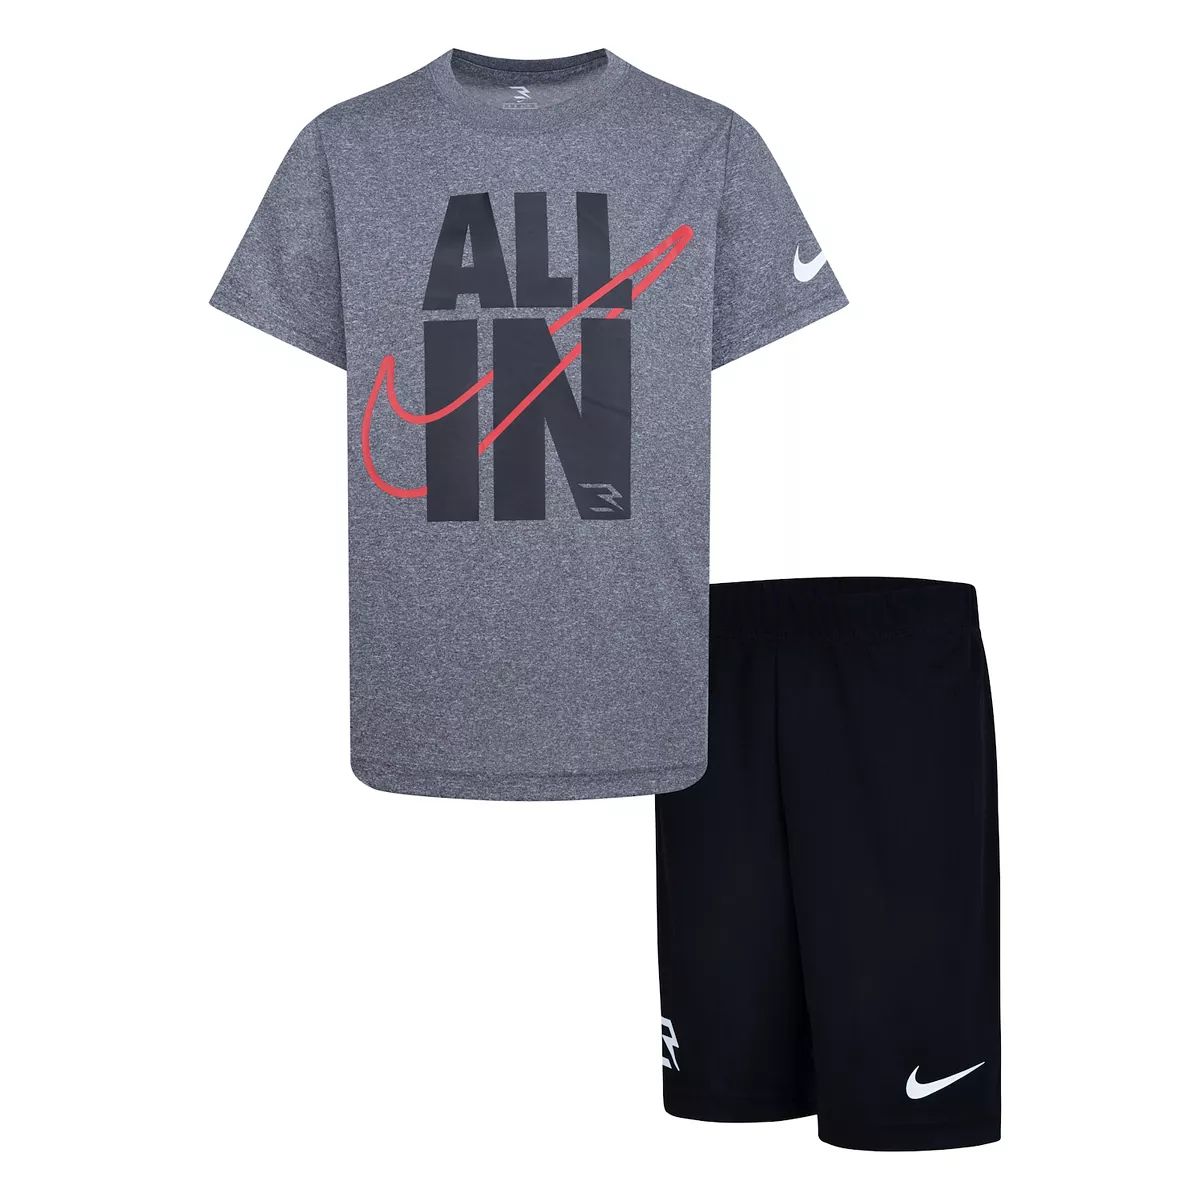 Boys 8-20 Nike 3BRAND by Russell Wilson "All In" Dri-FIT T-shirt & Athletic Shorts 2-piece Set | Kohl's